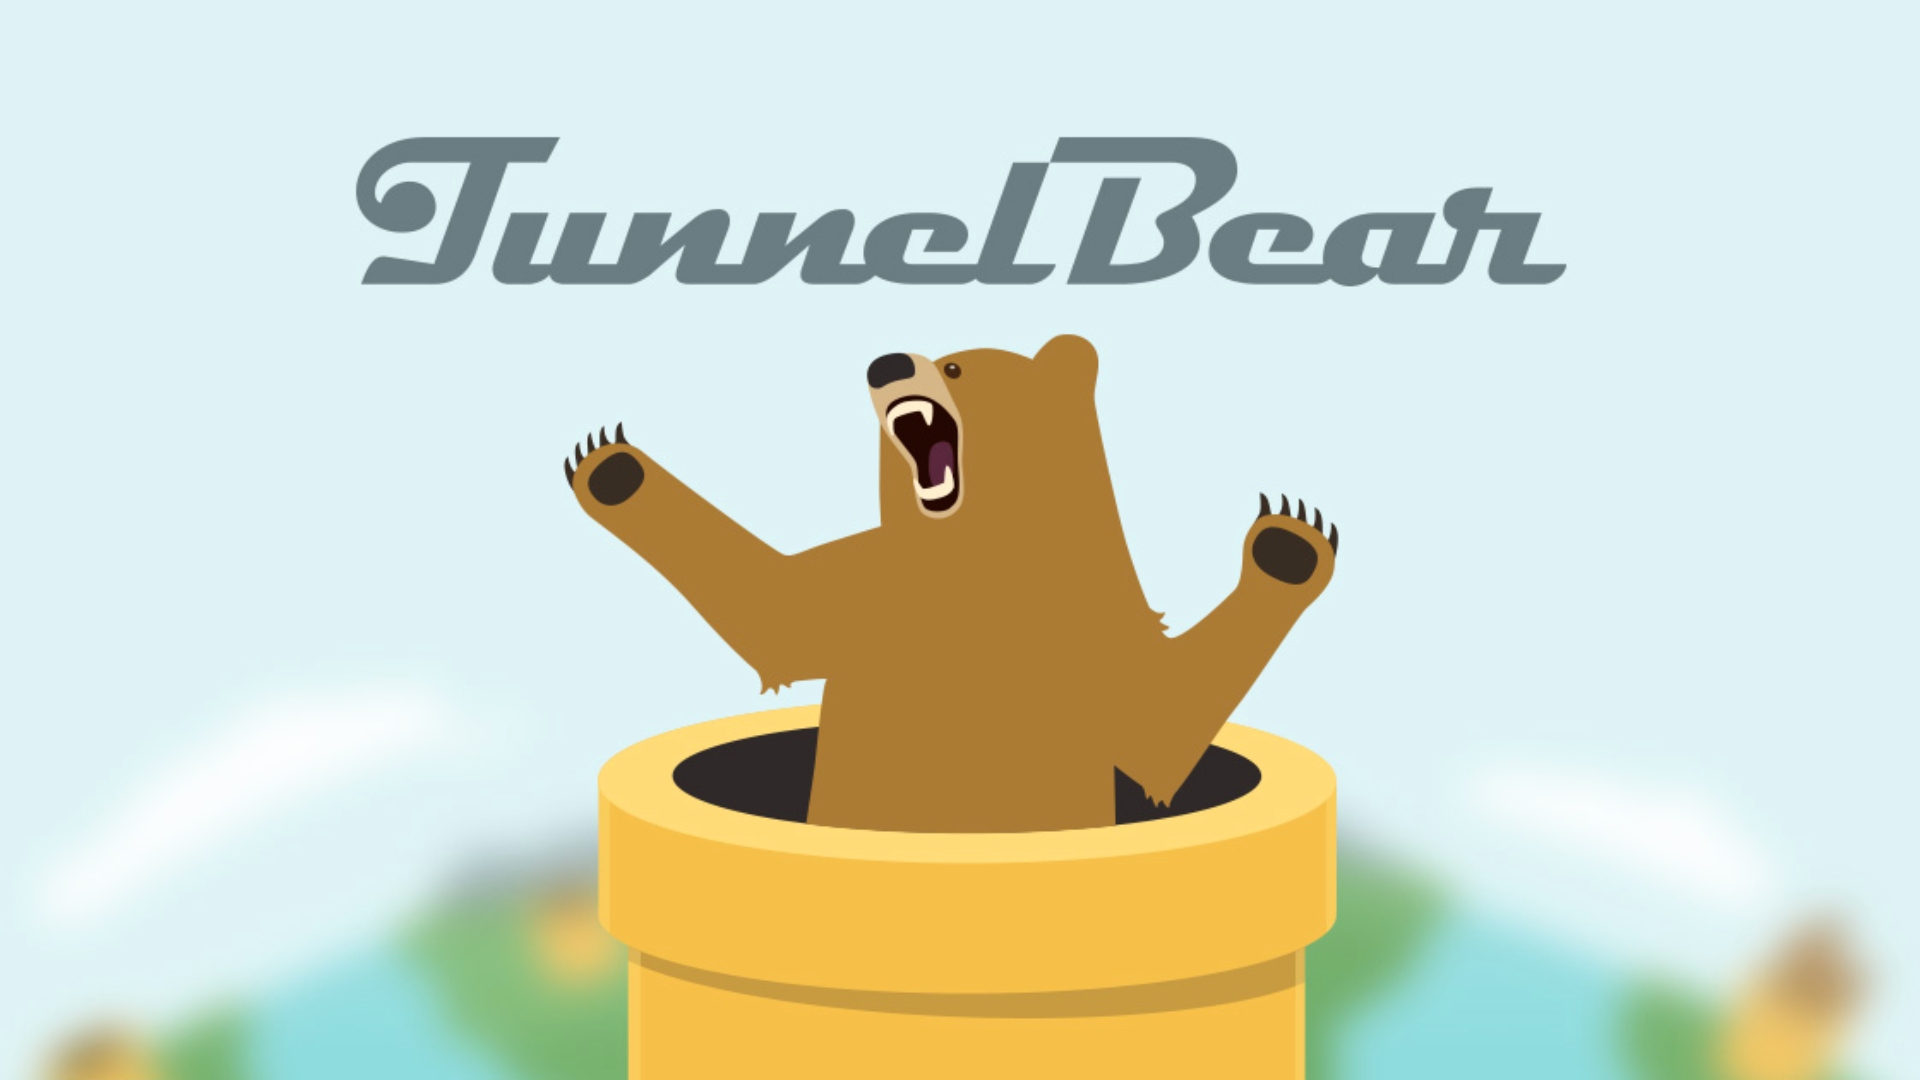 Best VPN apps: TunnelBear. Image shows a bear emerging from what looks like a pipe under the TunnelBear logo.